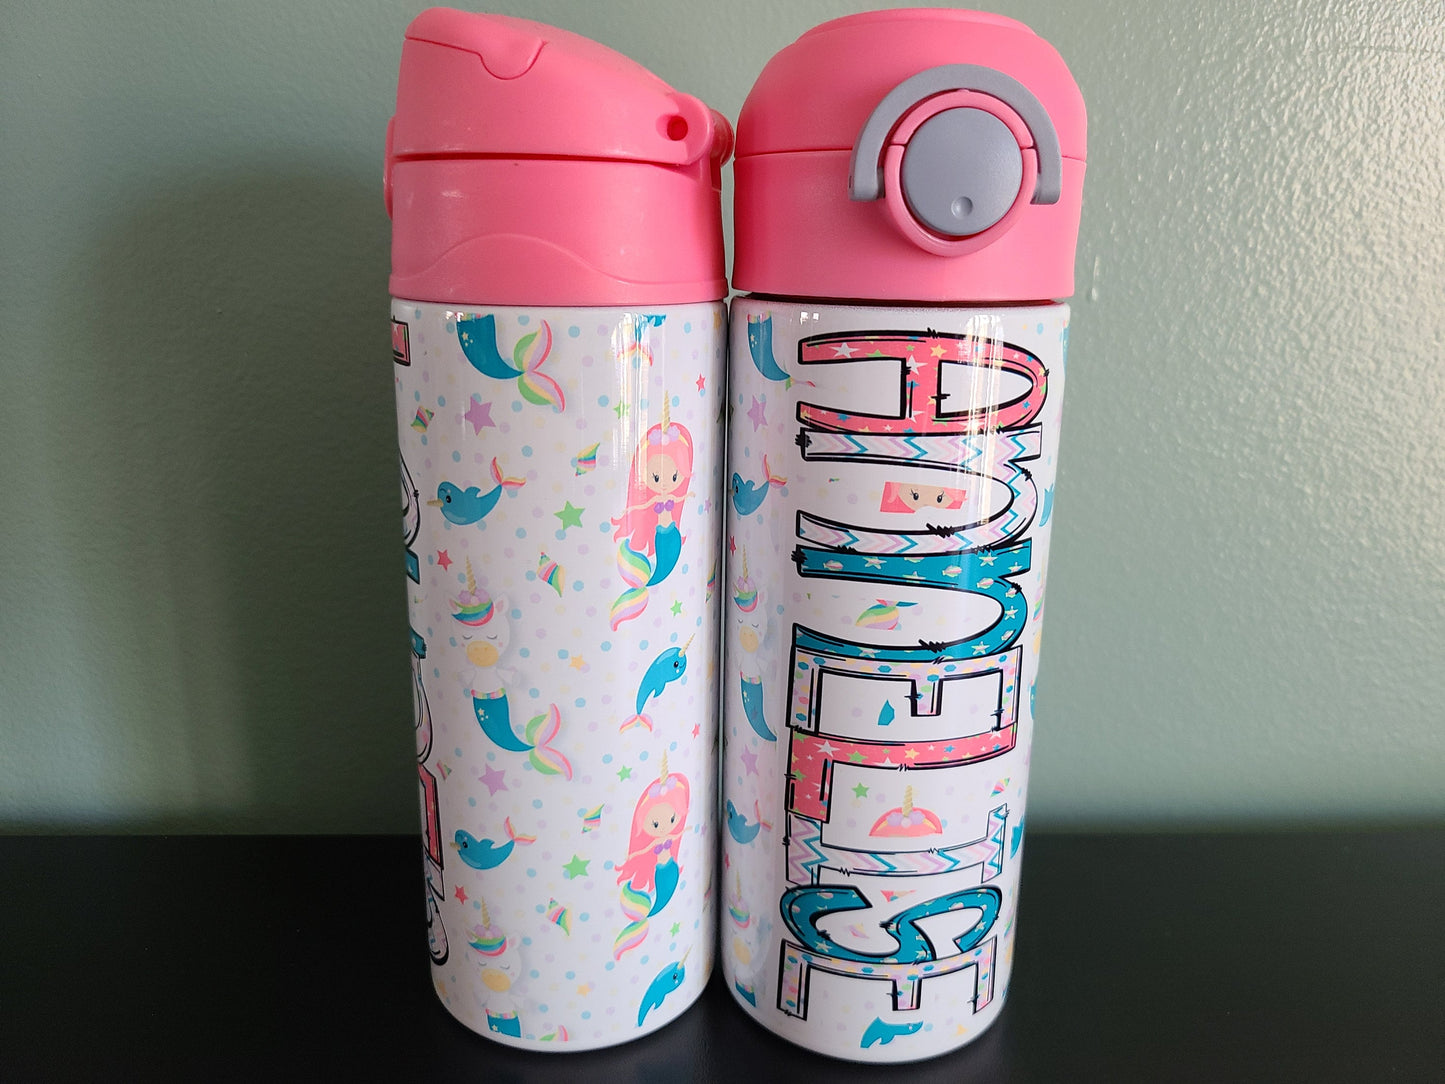 12 oz water bottle with a pink lid that has a built-in straw, locking push button and handle. This design featuring mermaids and unicorns. Personalized in coordinating colors. Back to School. two bottles to show the front and back